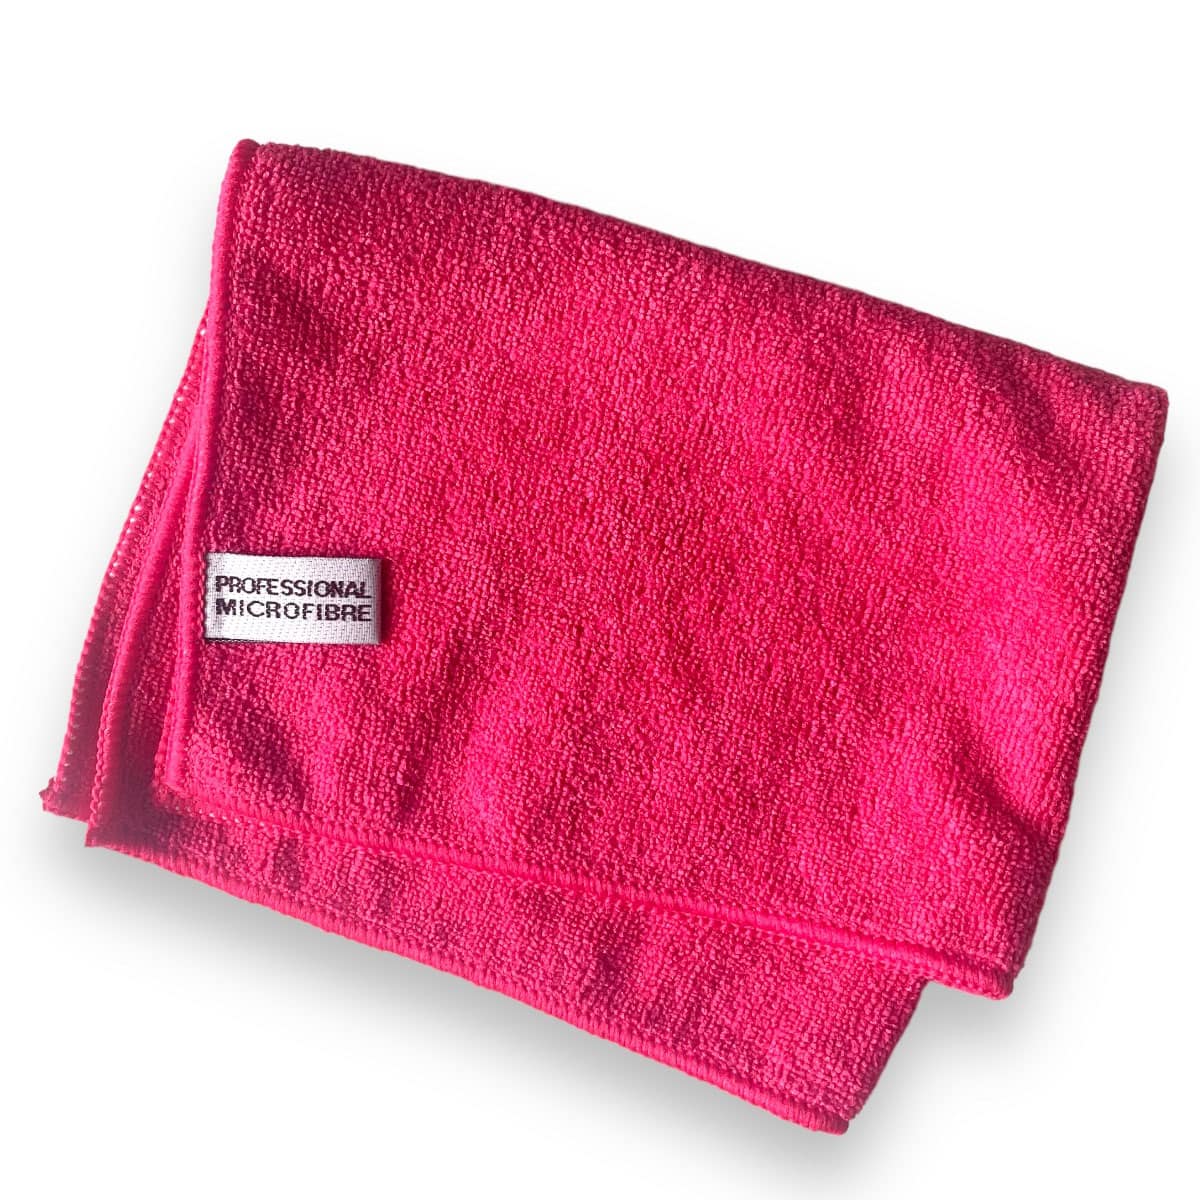 Soft professional microfibre cloth: Ideal for your helmet care